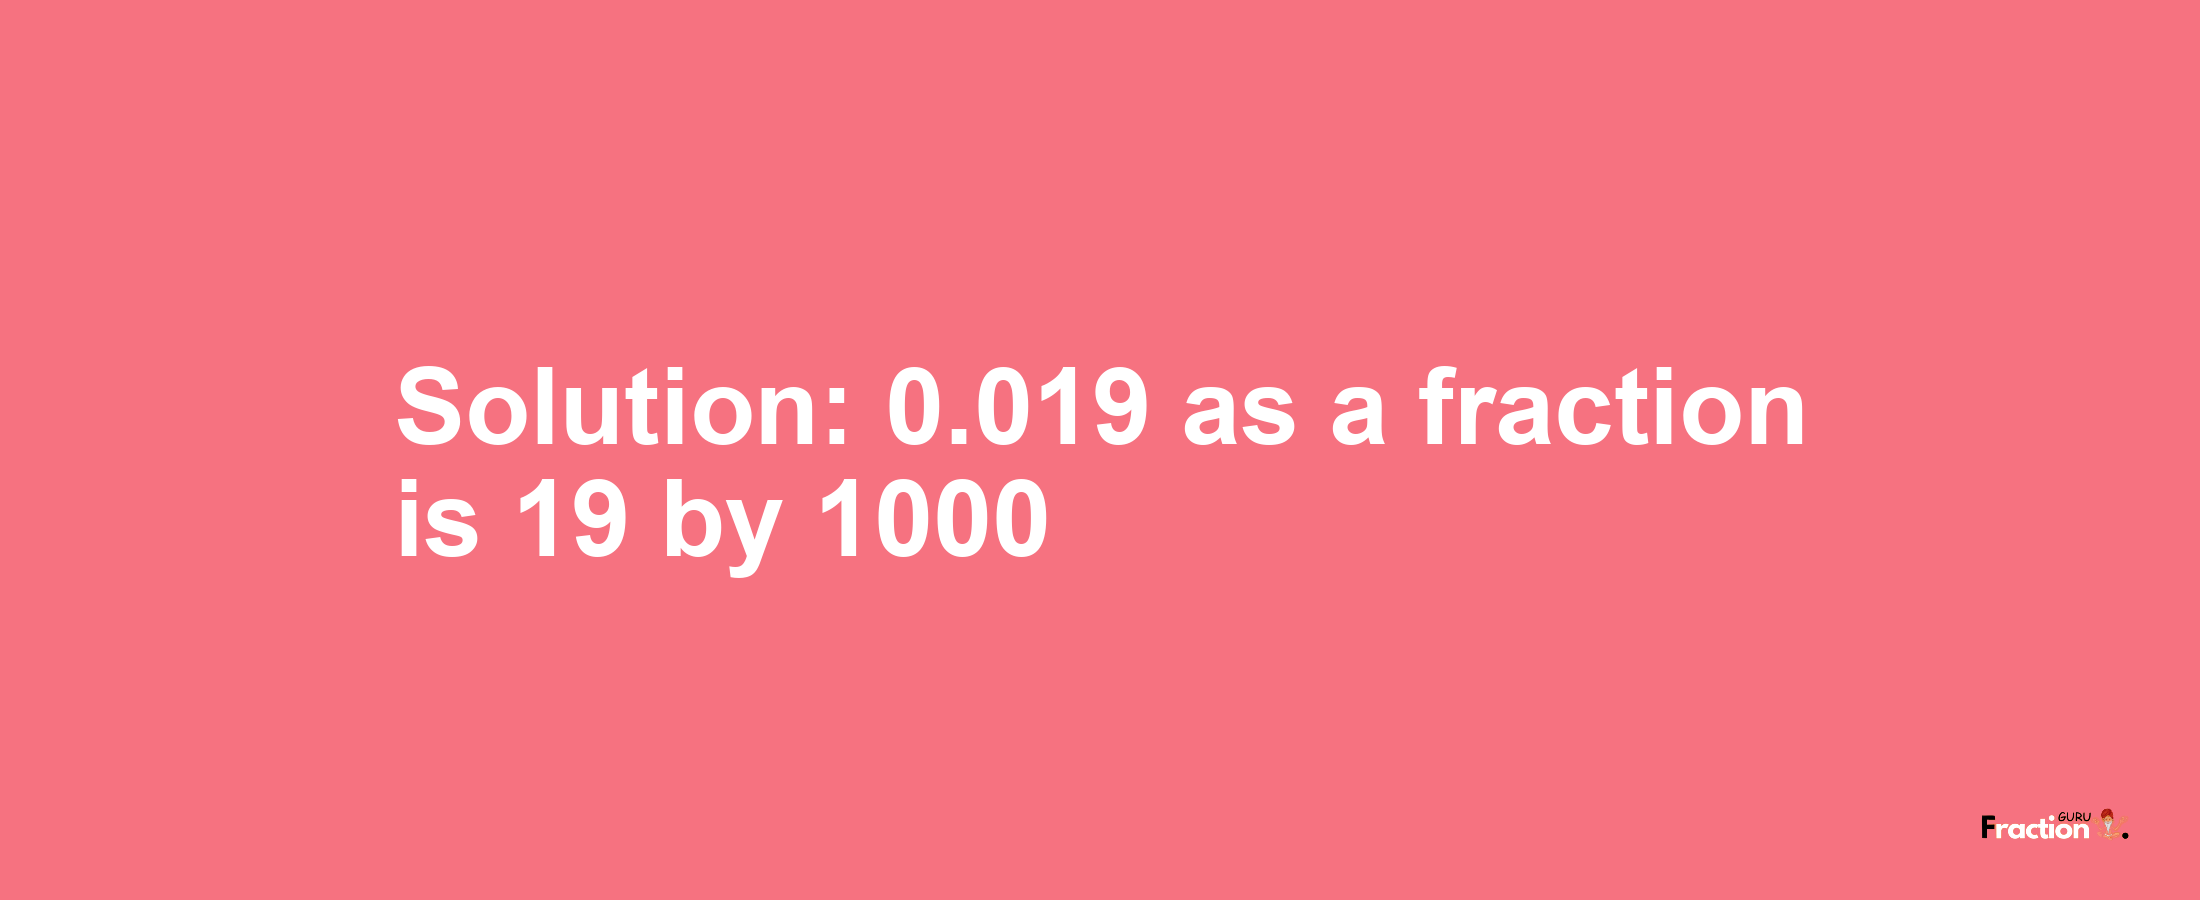 Solution:0.019 as a fraction is 19/1000